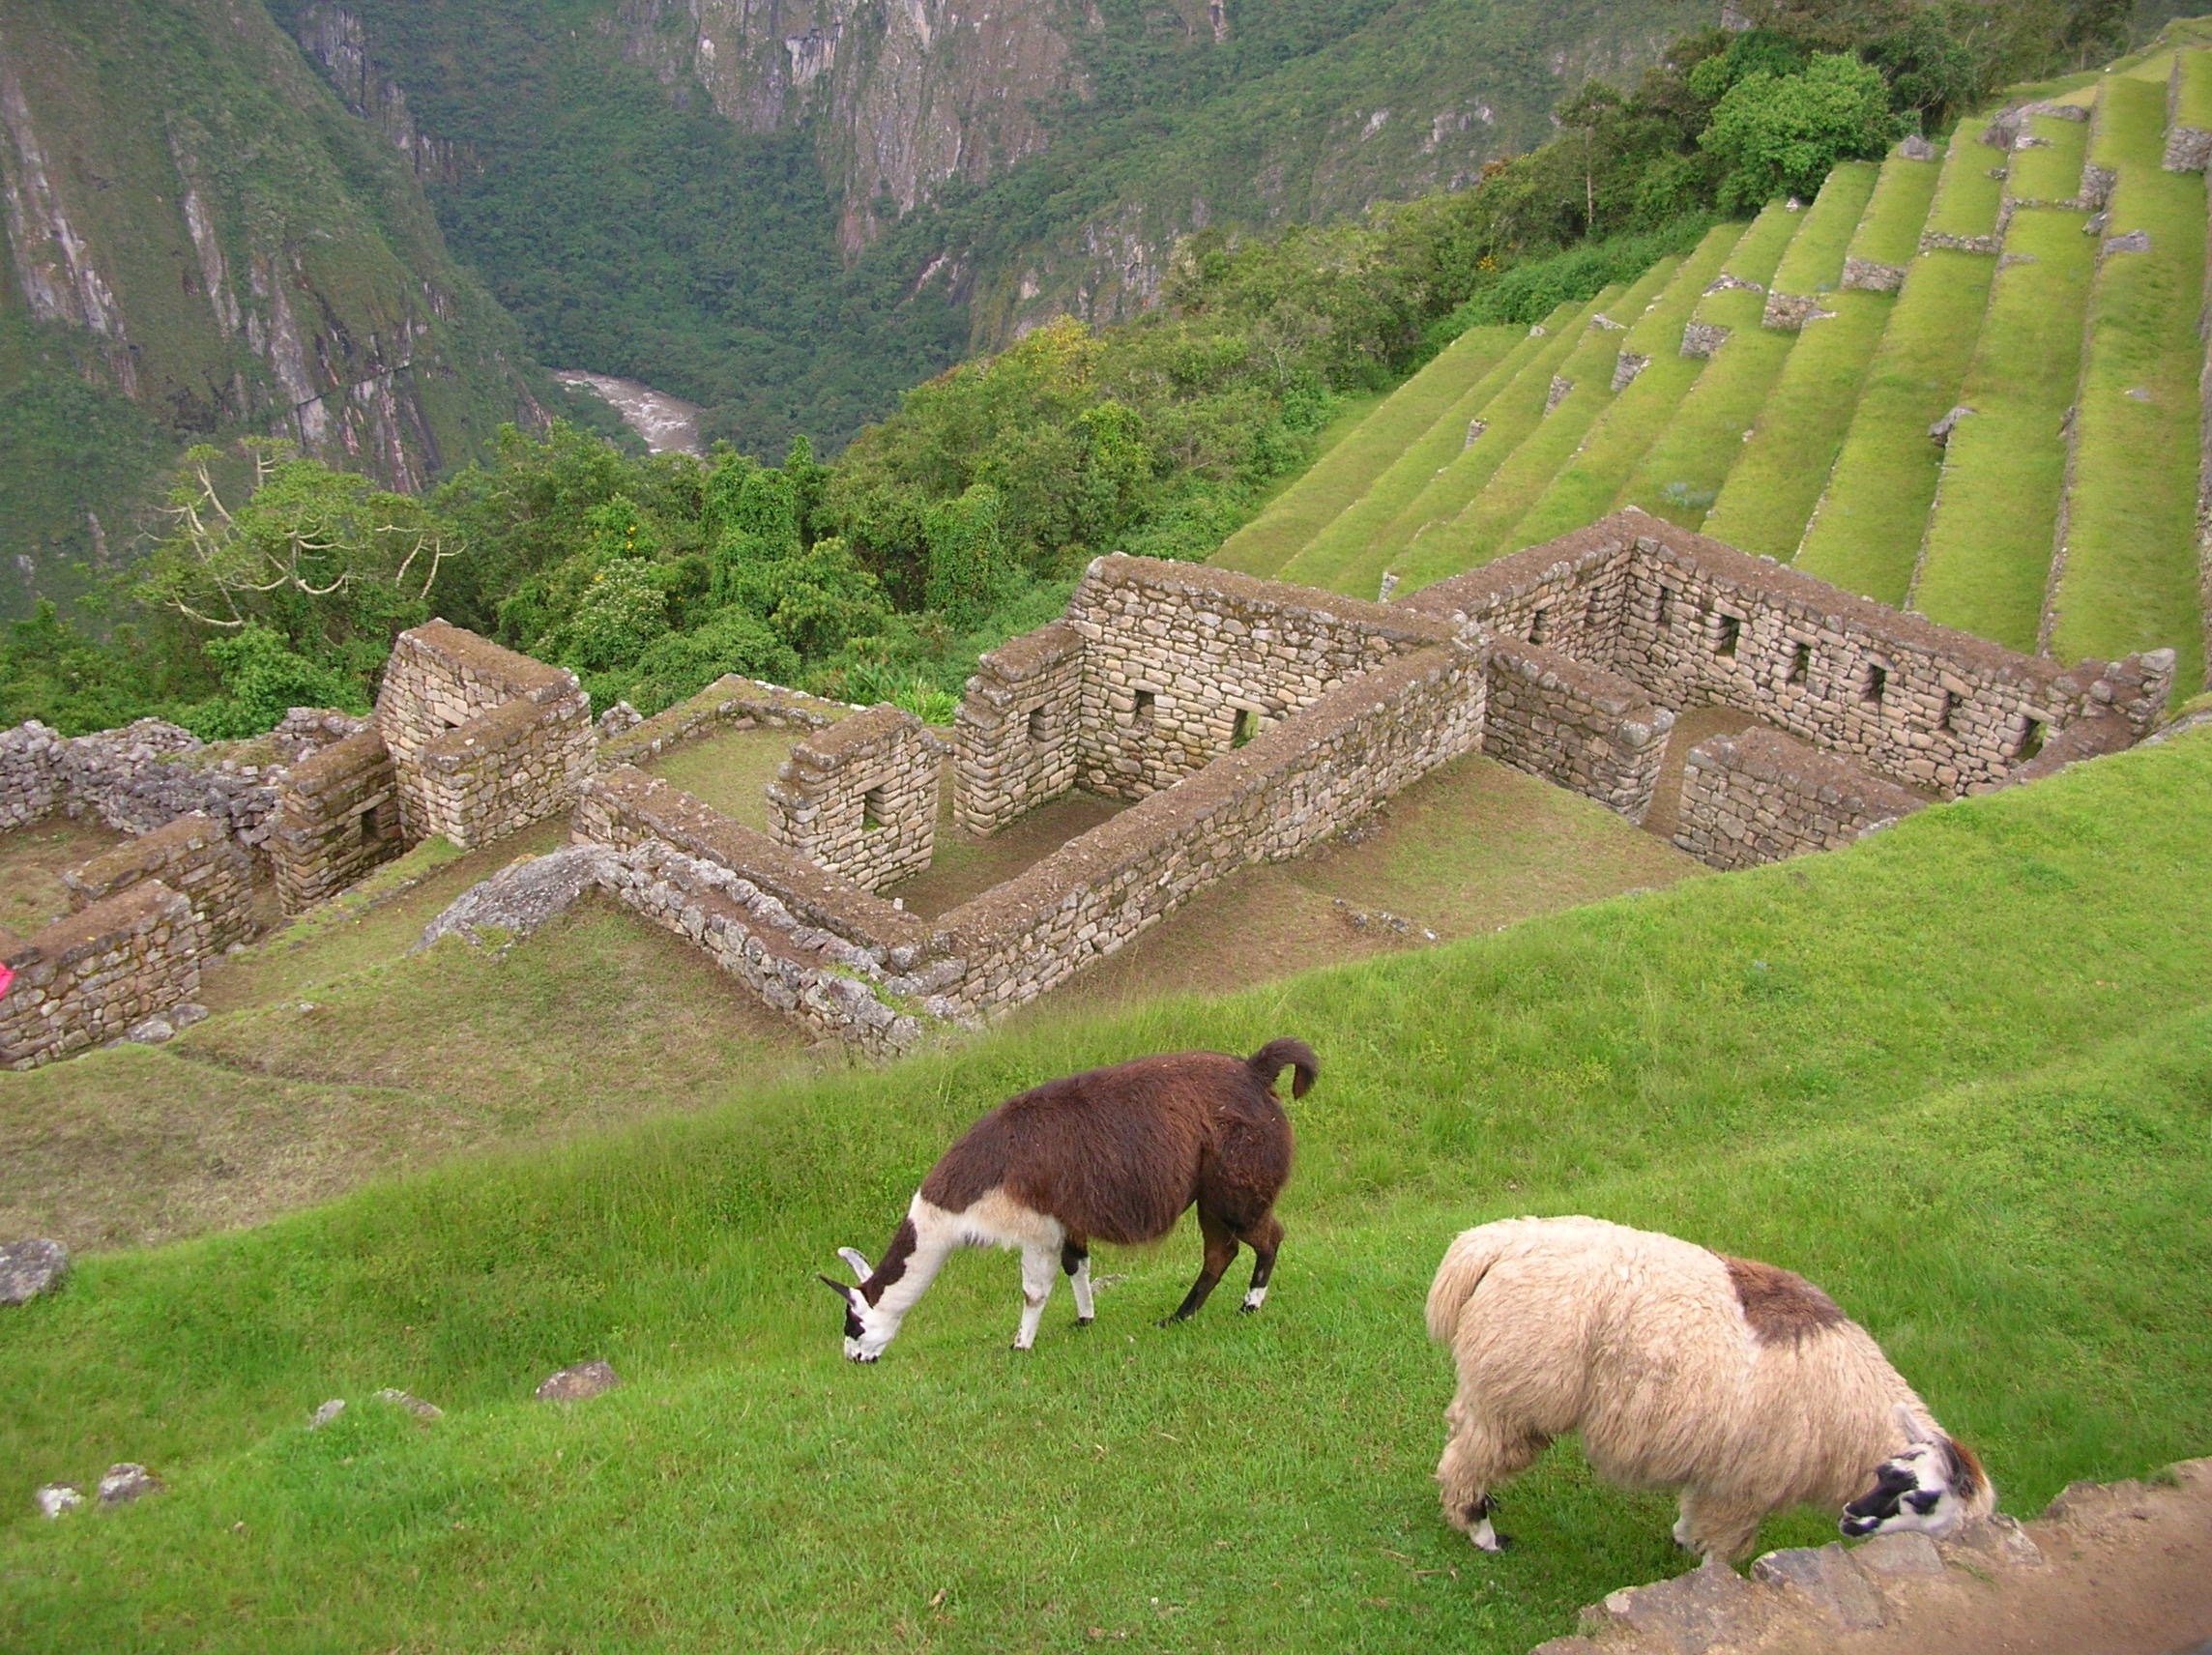 Goats grazing at the ancient site. Photo by Marla Norman.